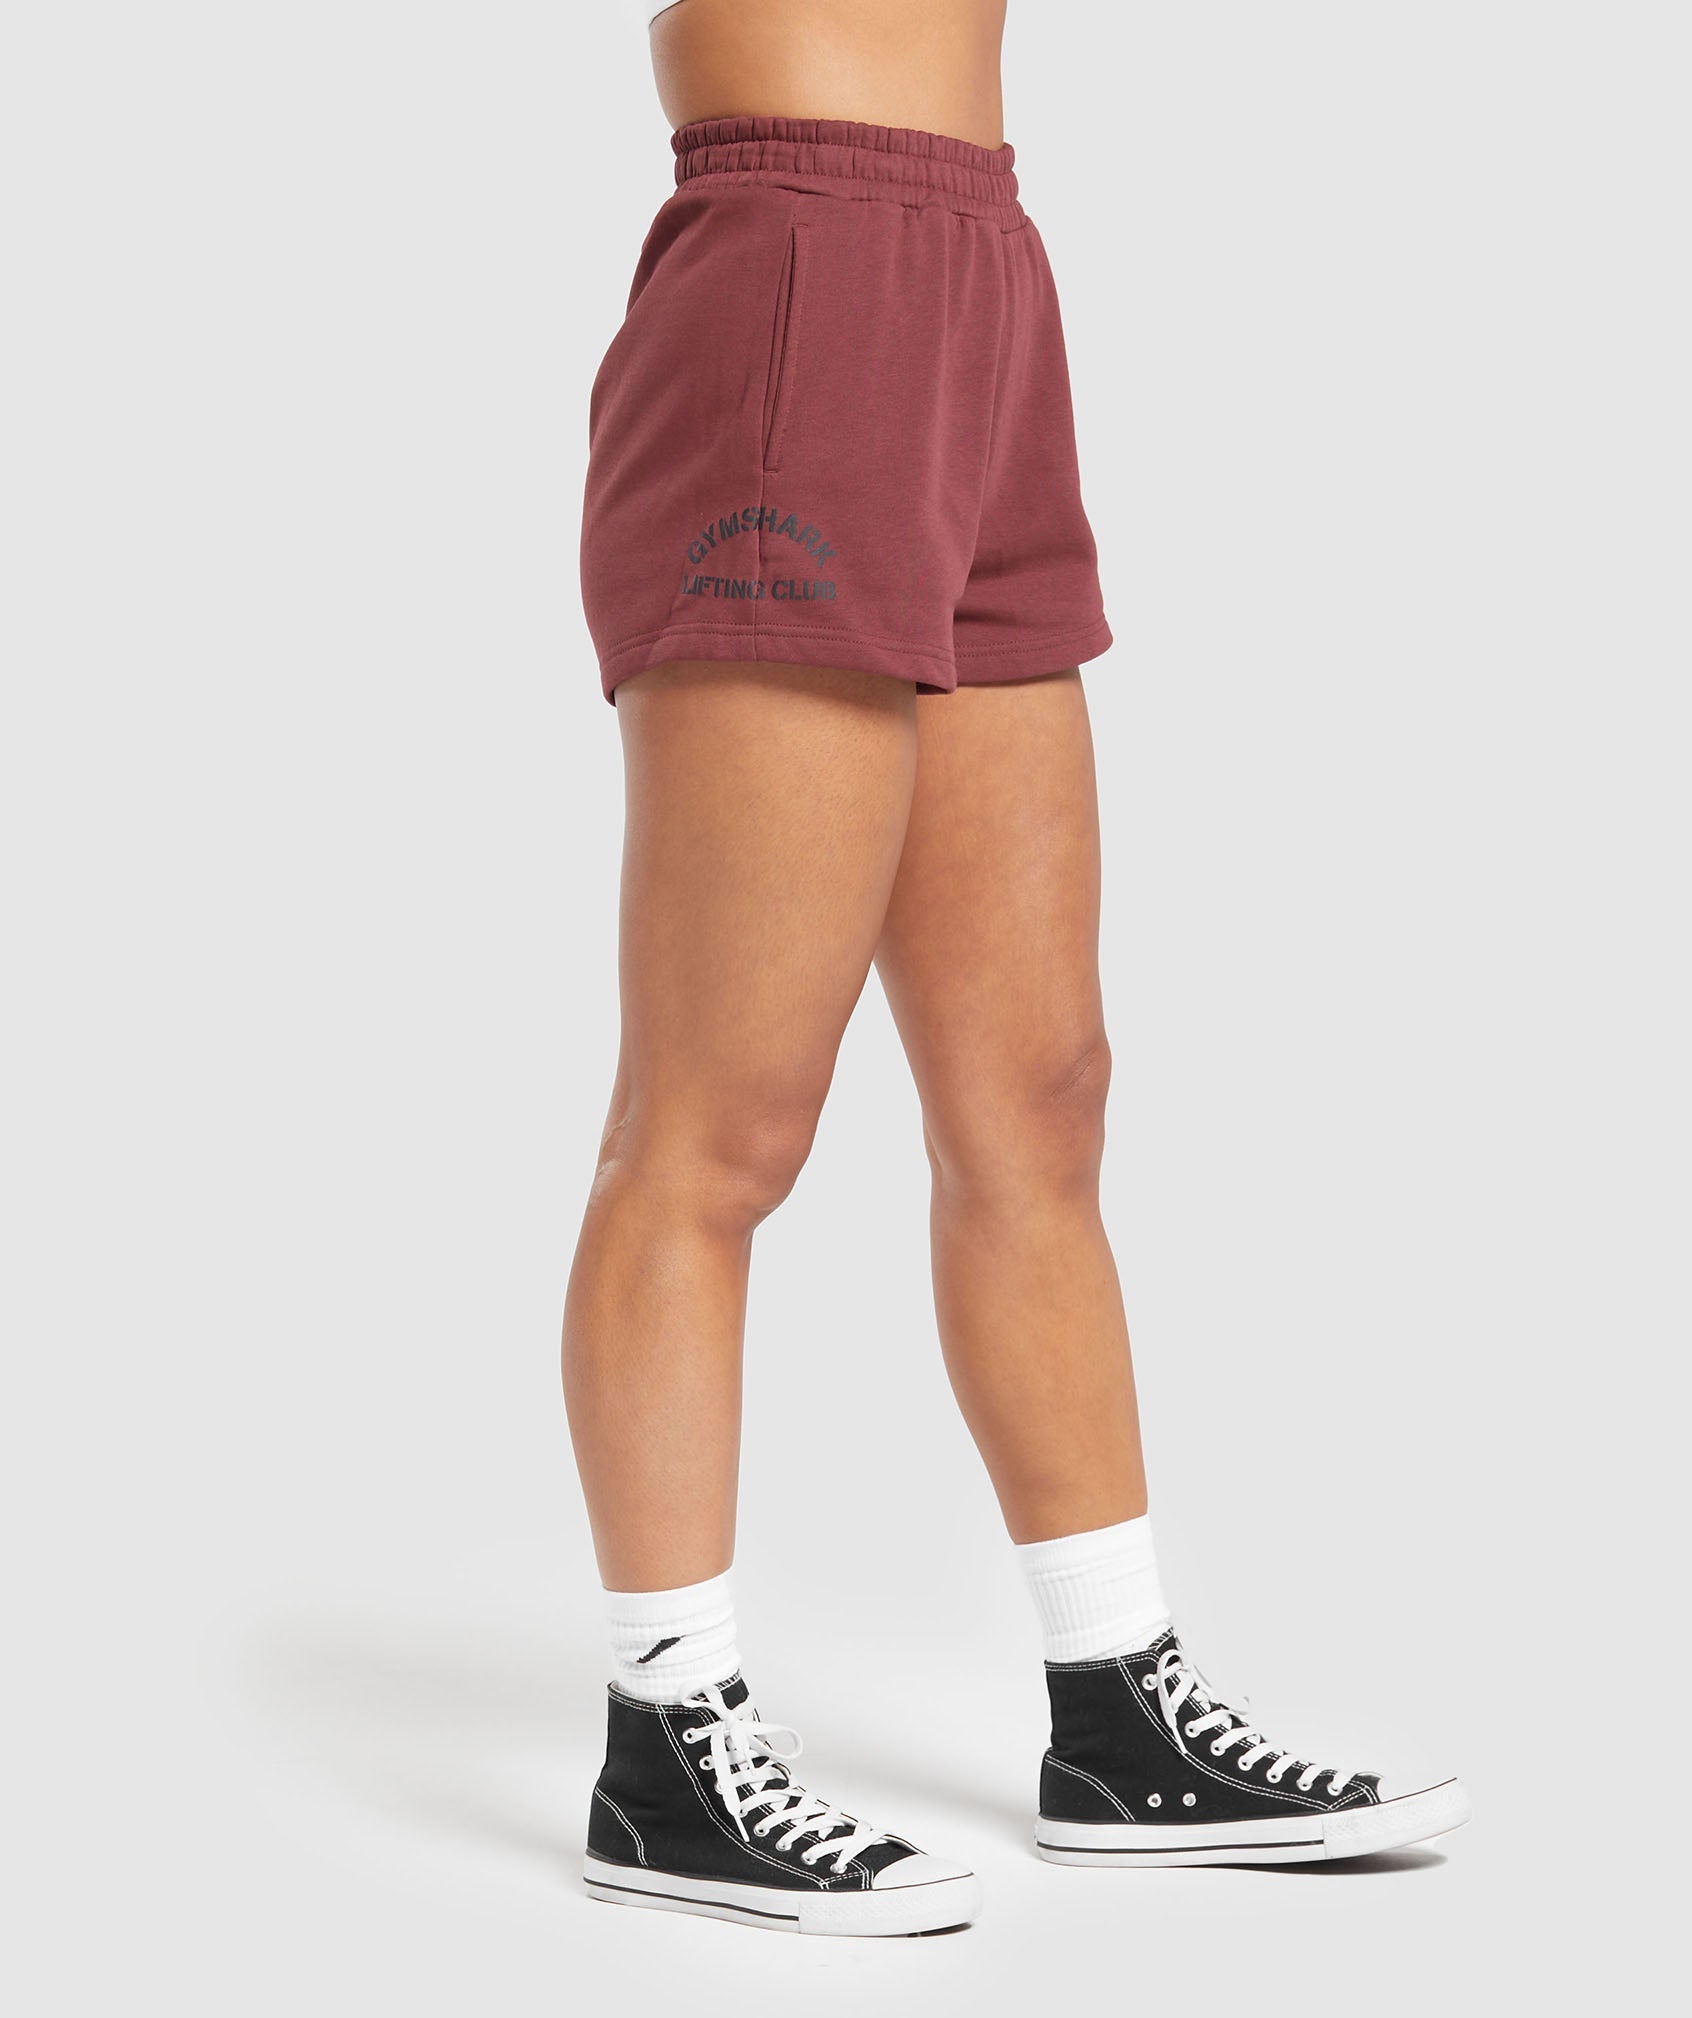 Built Graphic Shorts in Washed Burgundy - view 1